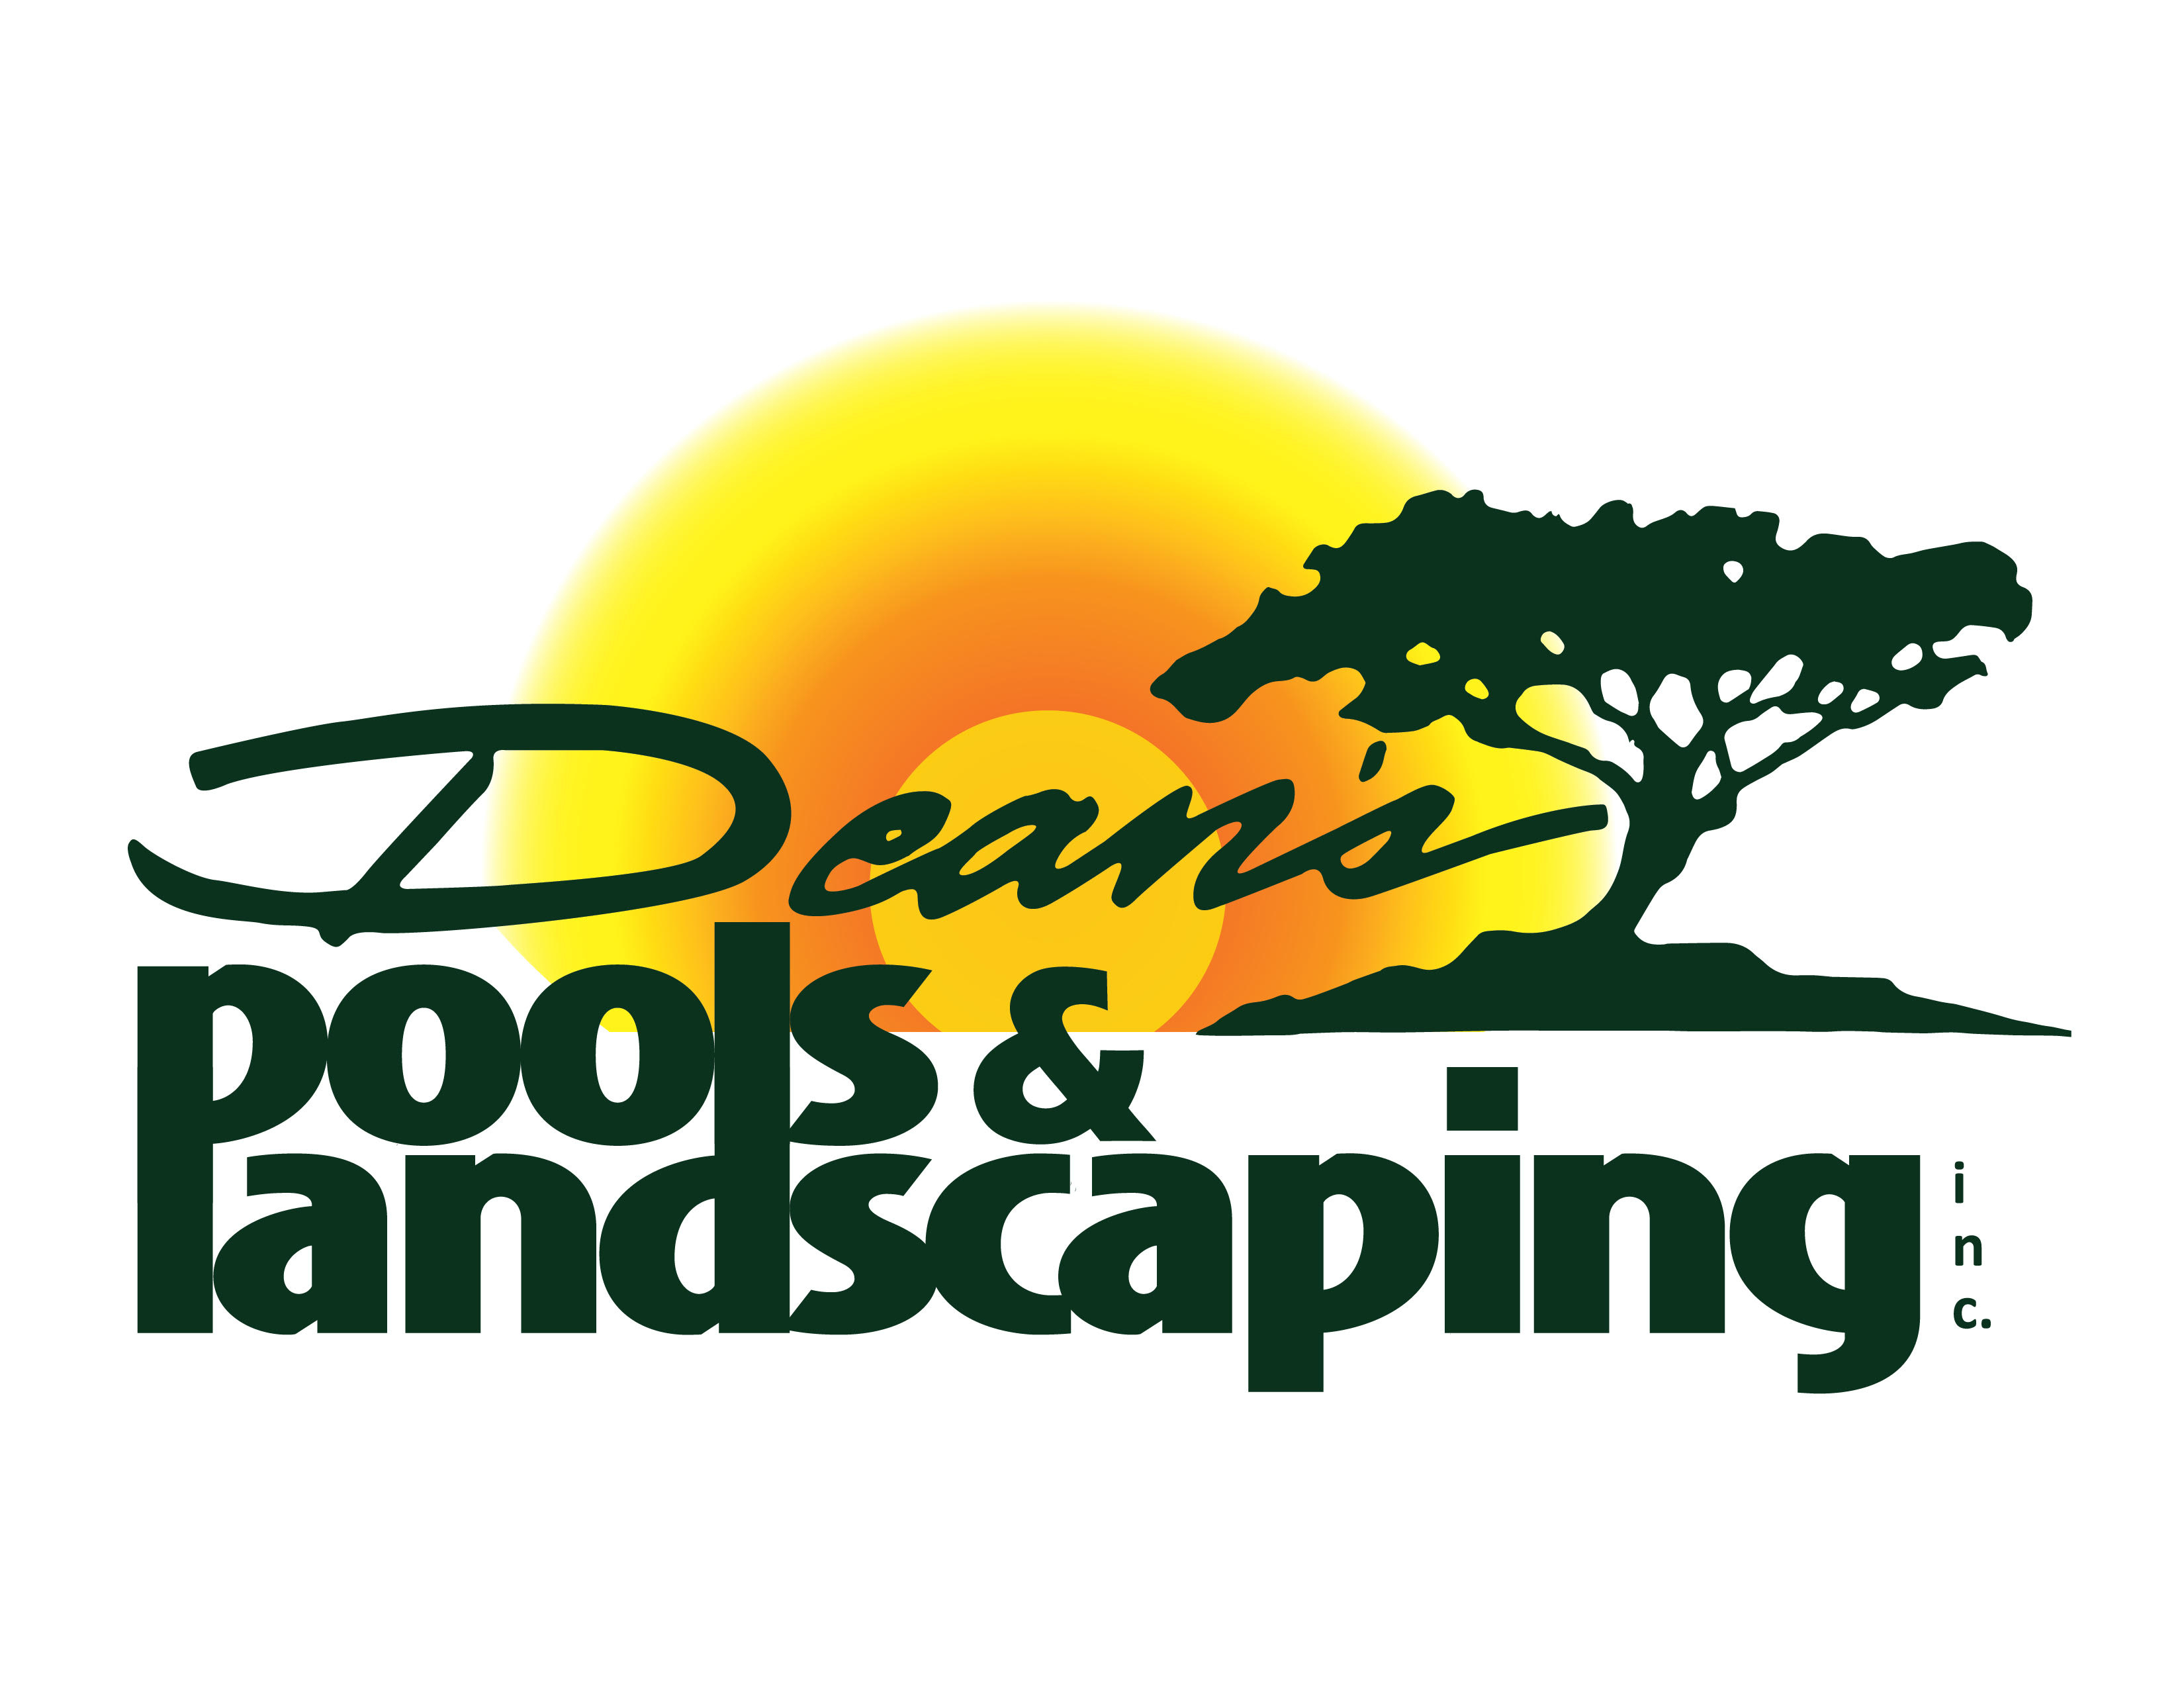 Dean's Pools & Landscaping Inc.